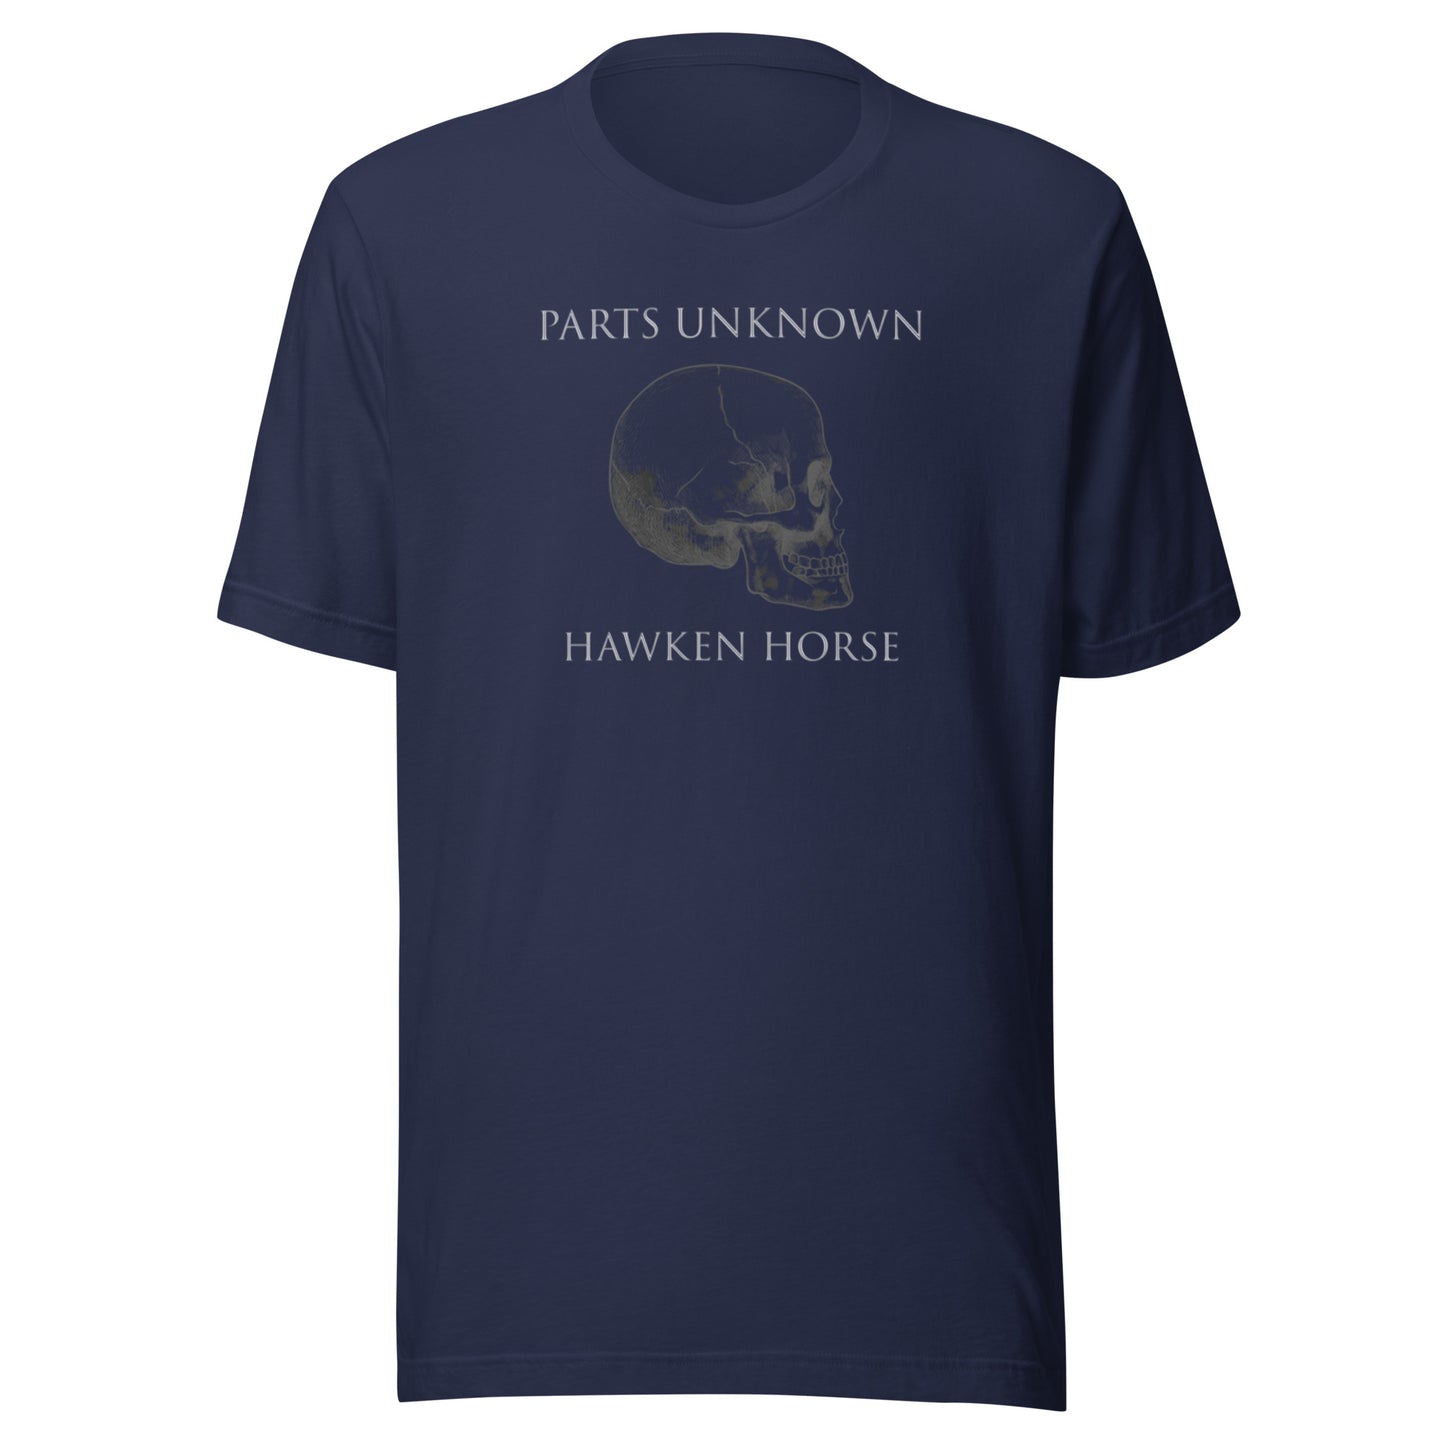 Parts Unknown t-shirt